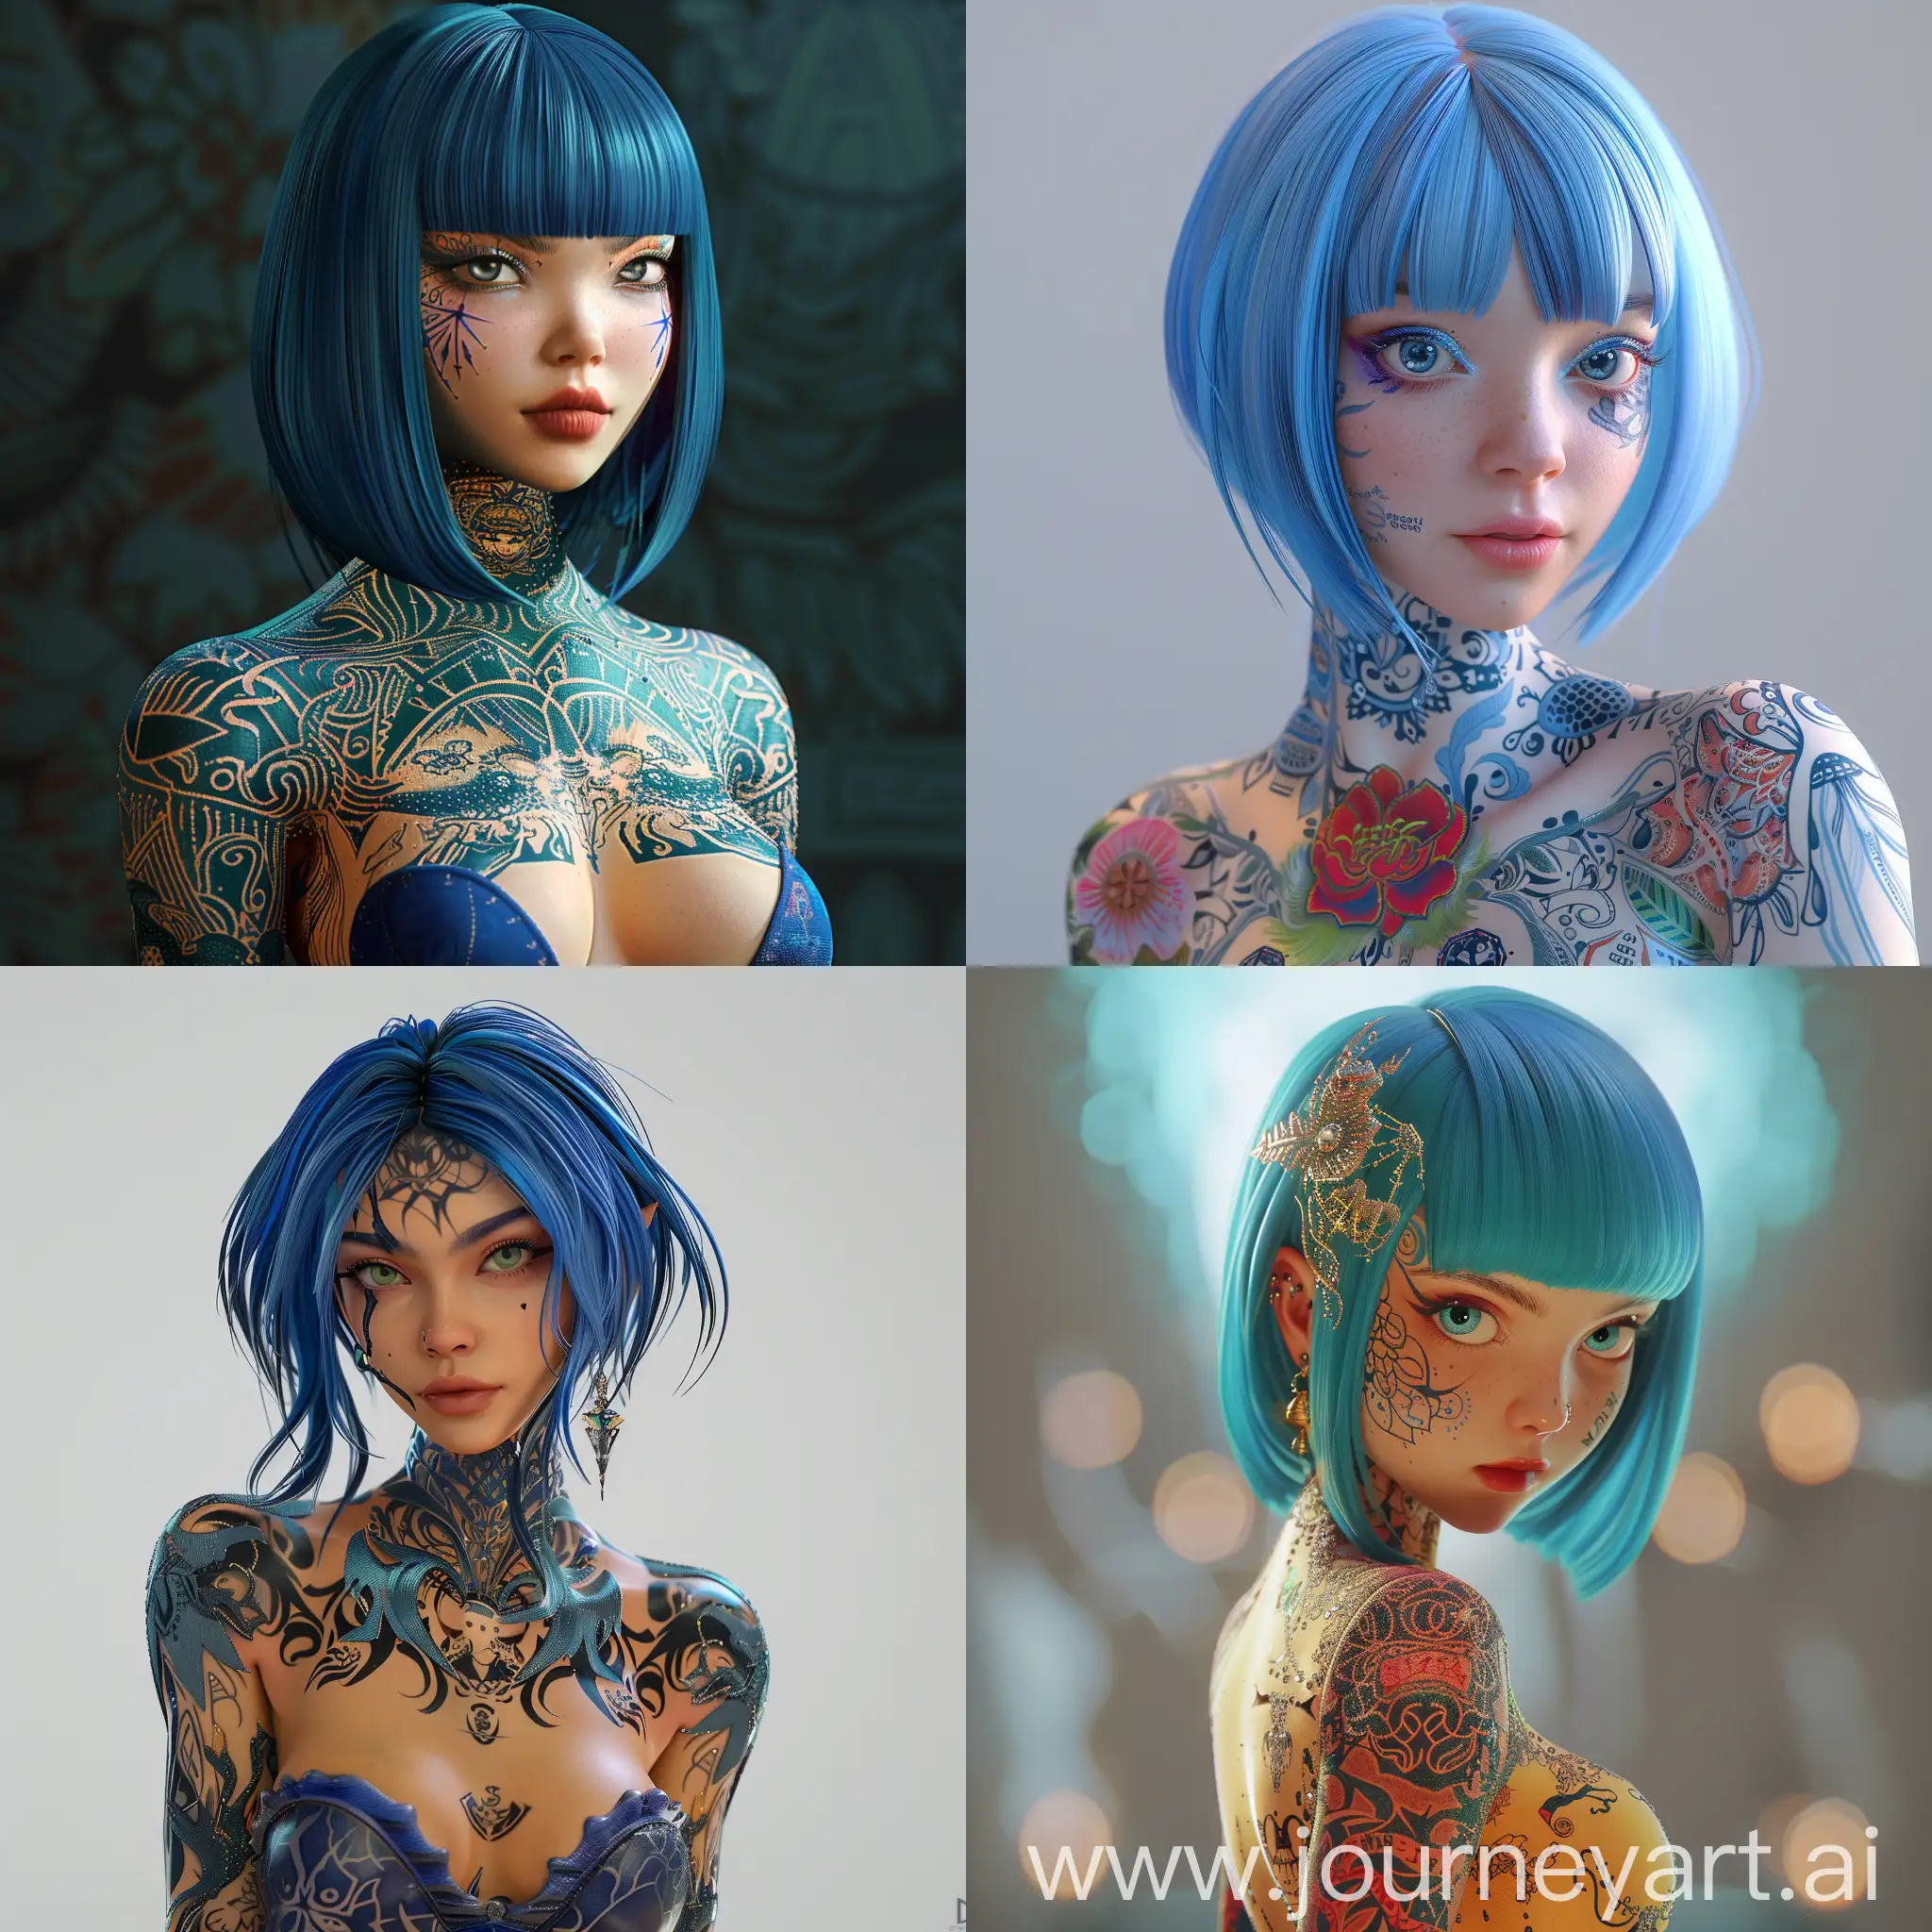 Realistic-Anime-Woman-with-Intricate-Blue-Hair-and-Tattoos